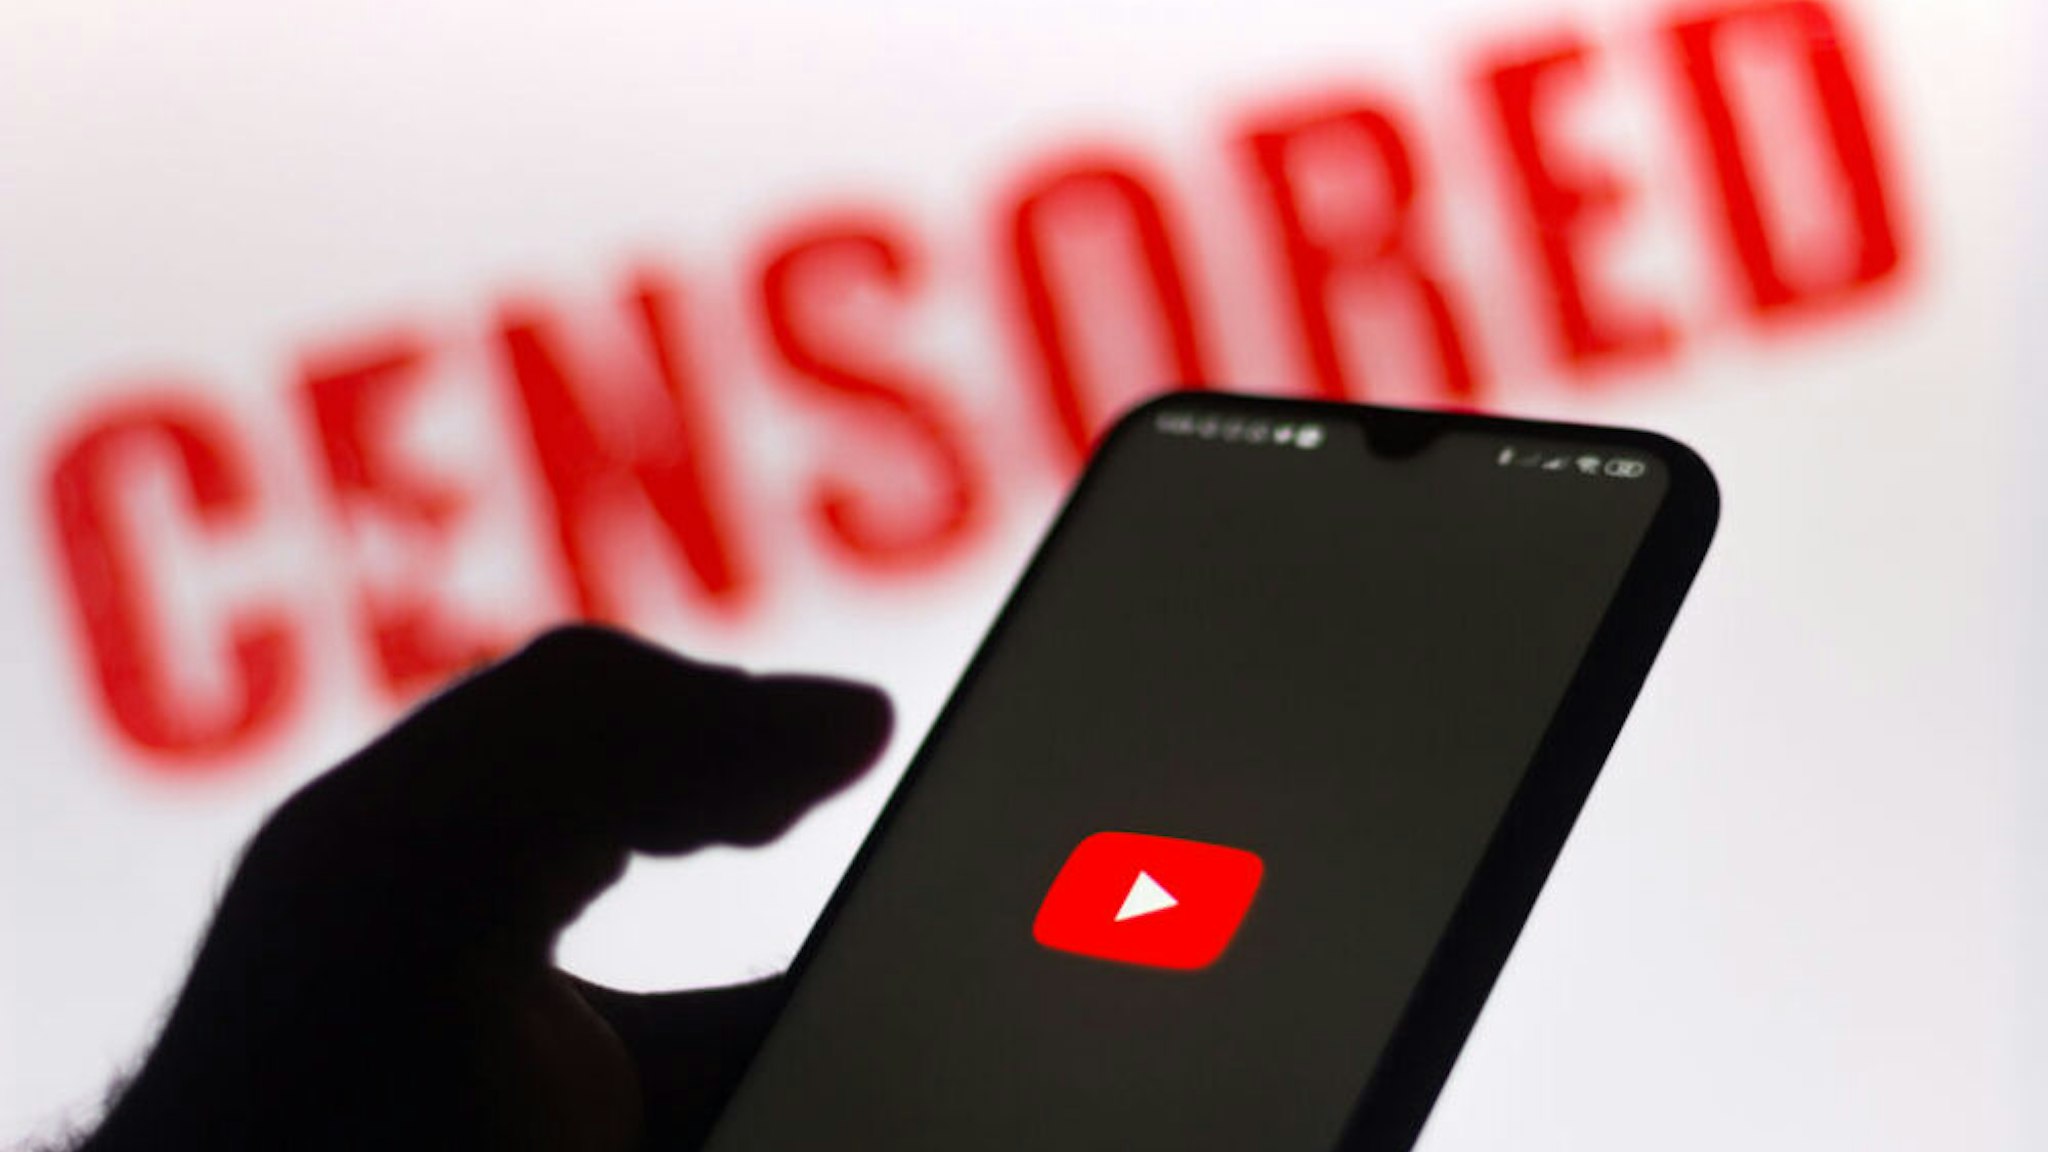 BRAZIL - 2020/06/15: In this photo illustration the YouTube logo is displayed on a smartphone and a red alerting word "CENSORED" on the blurred background.